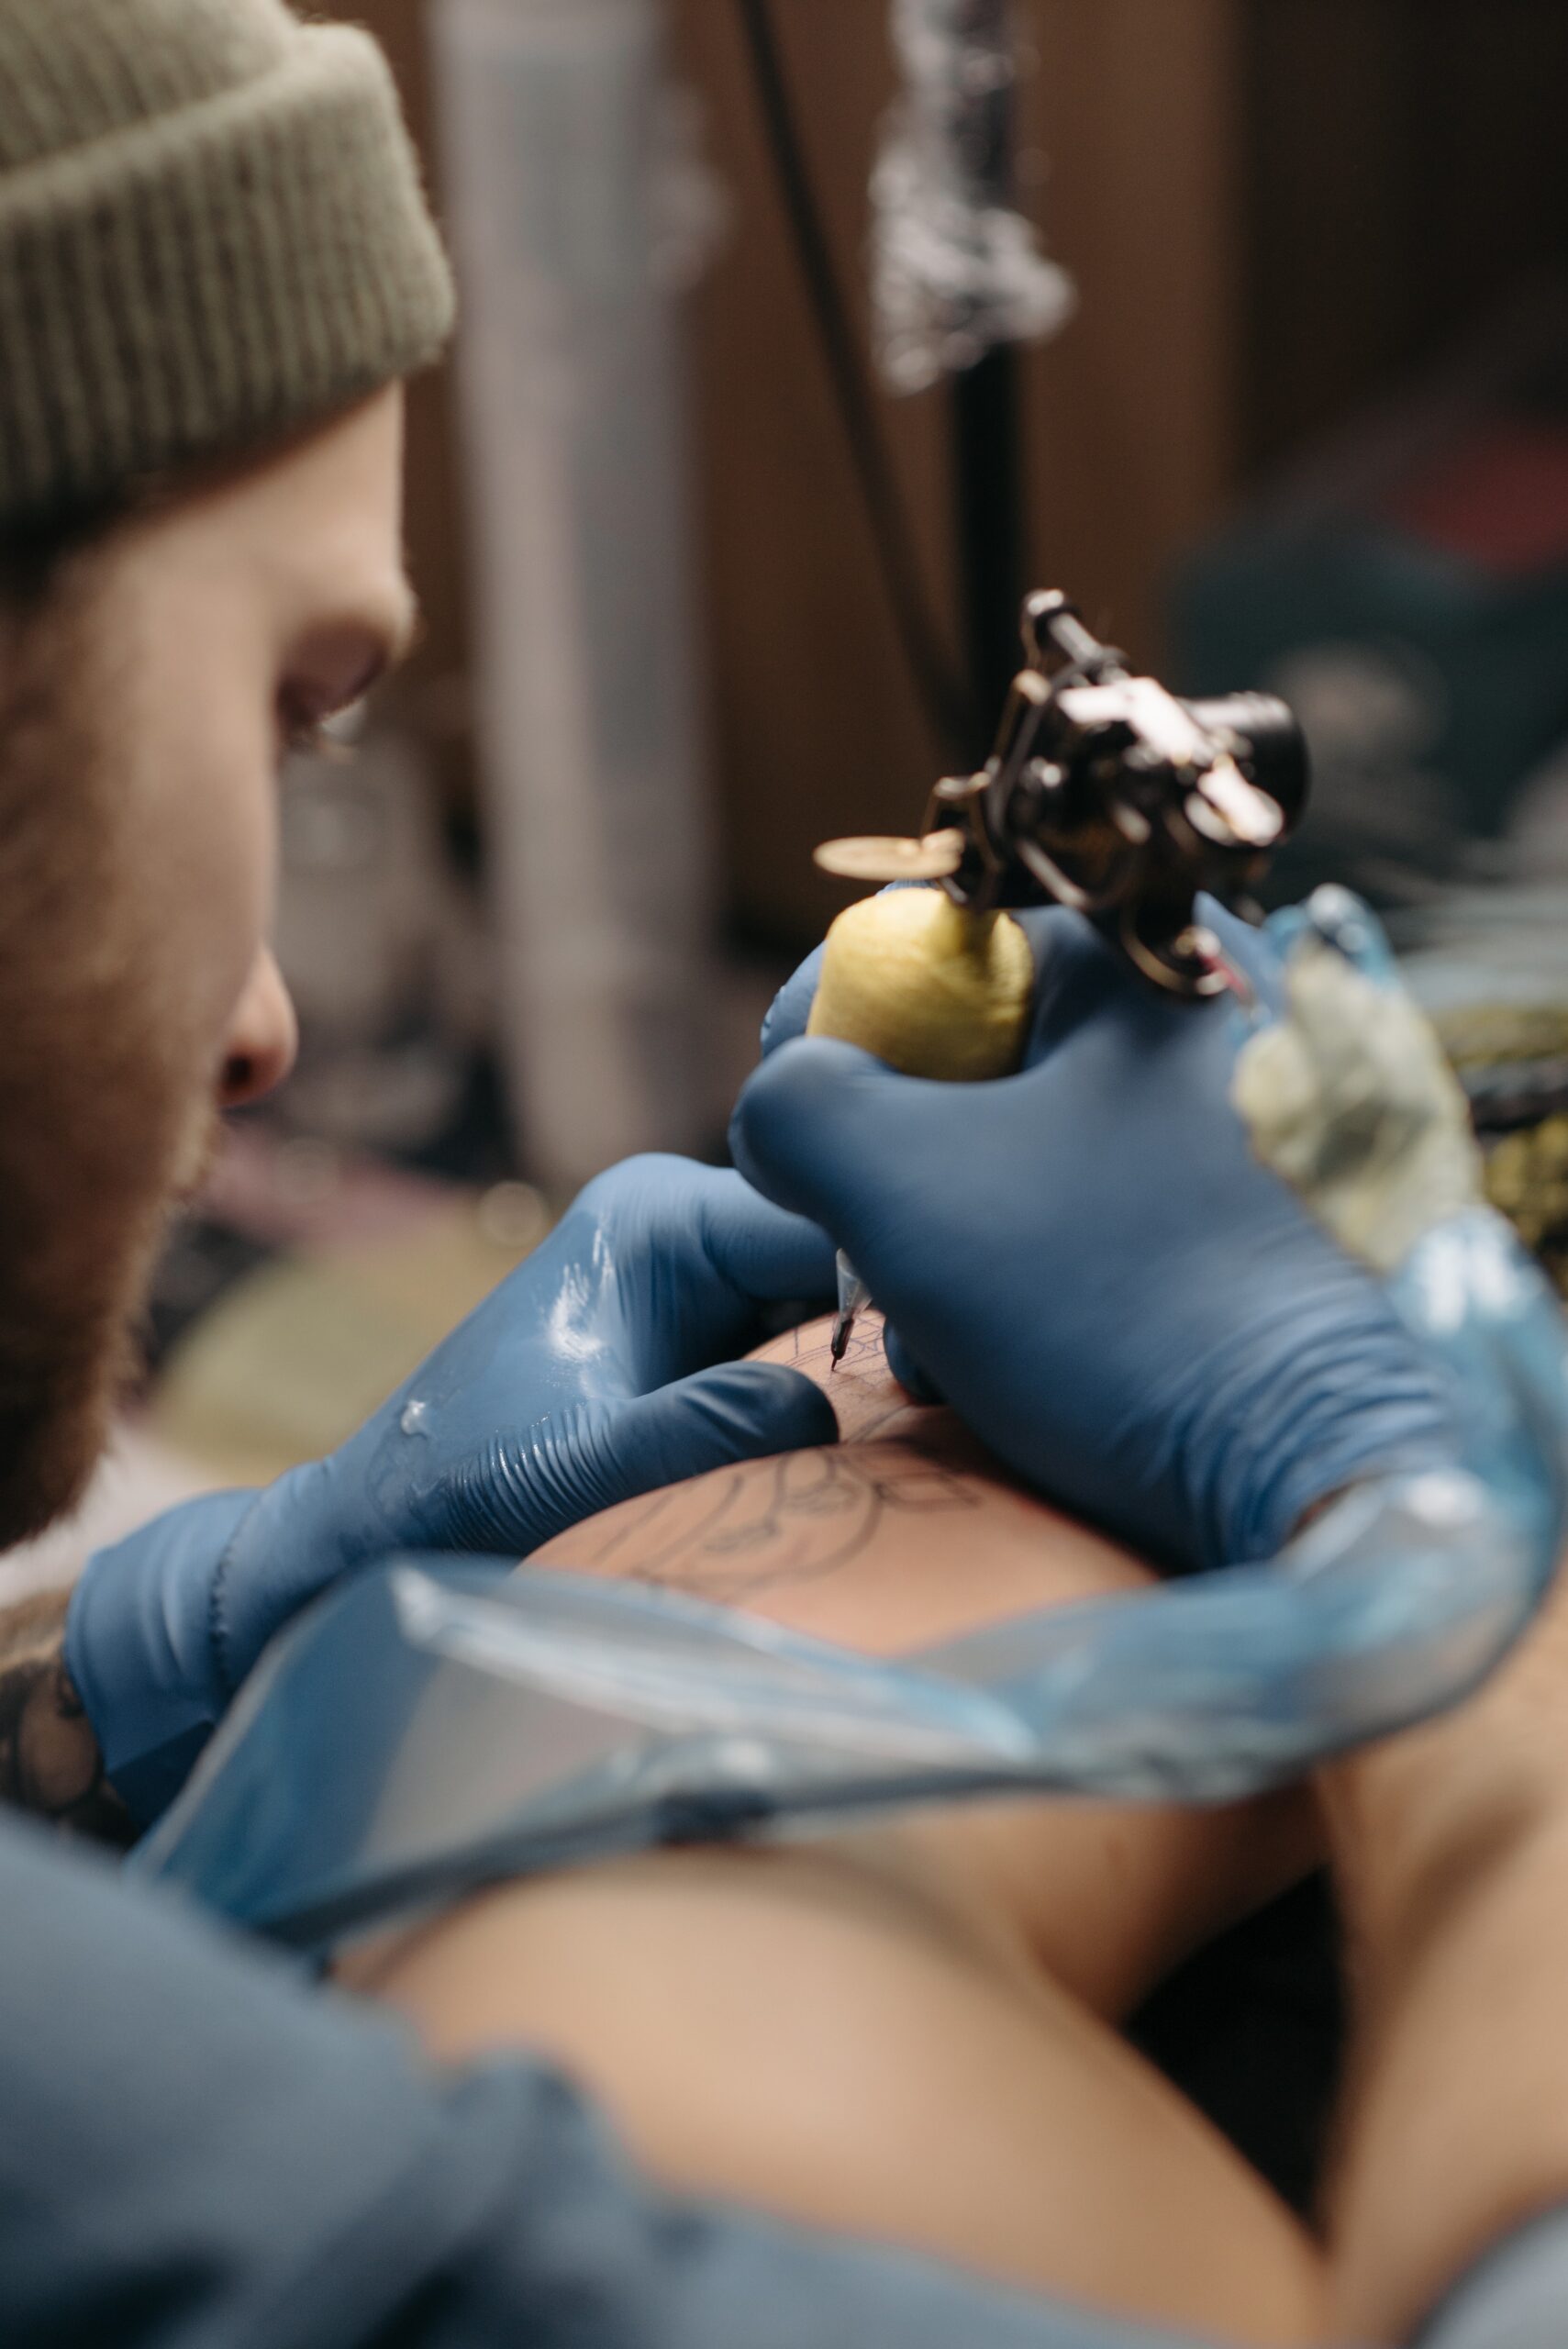 How to Become a Tattoo Removal Technician?